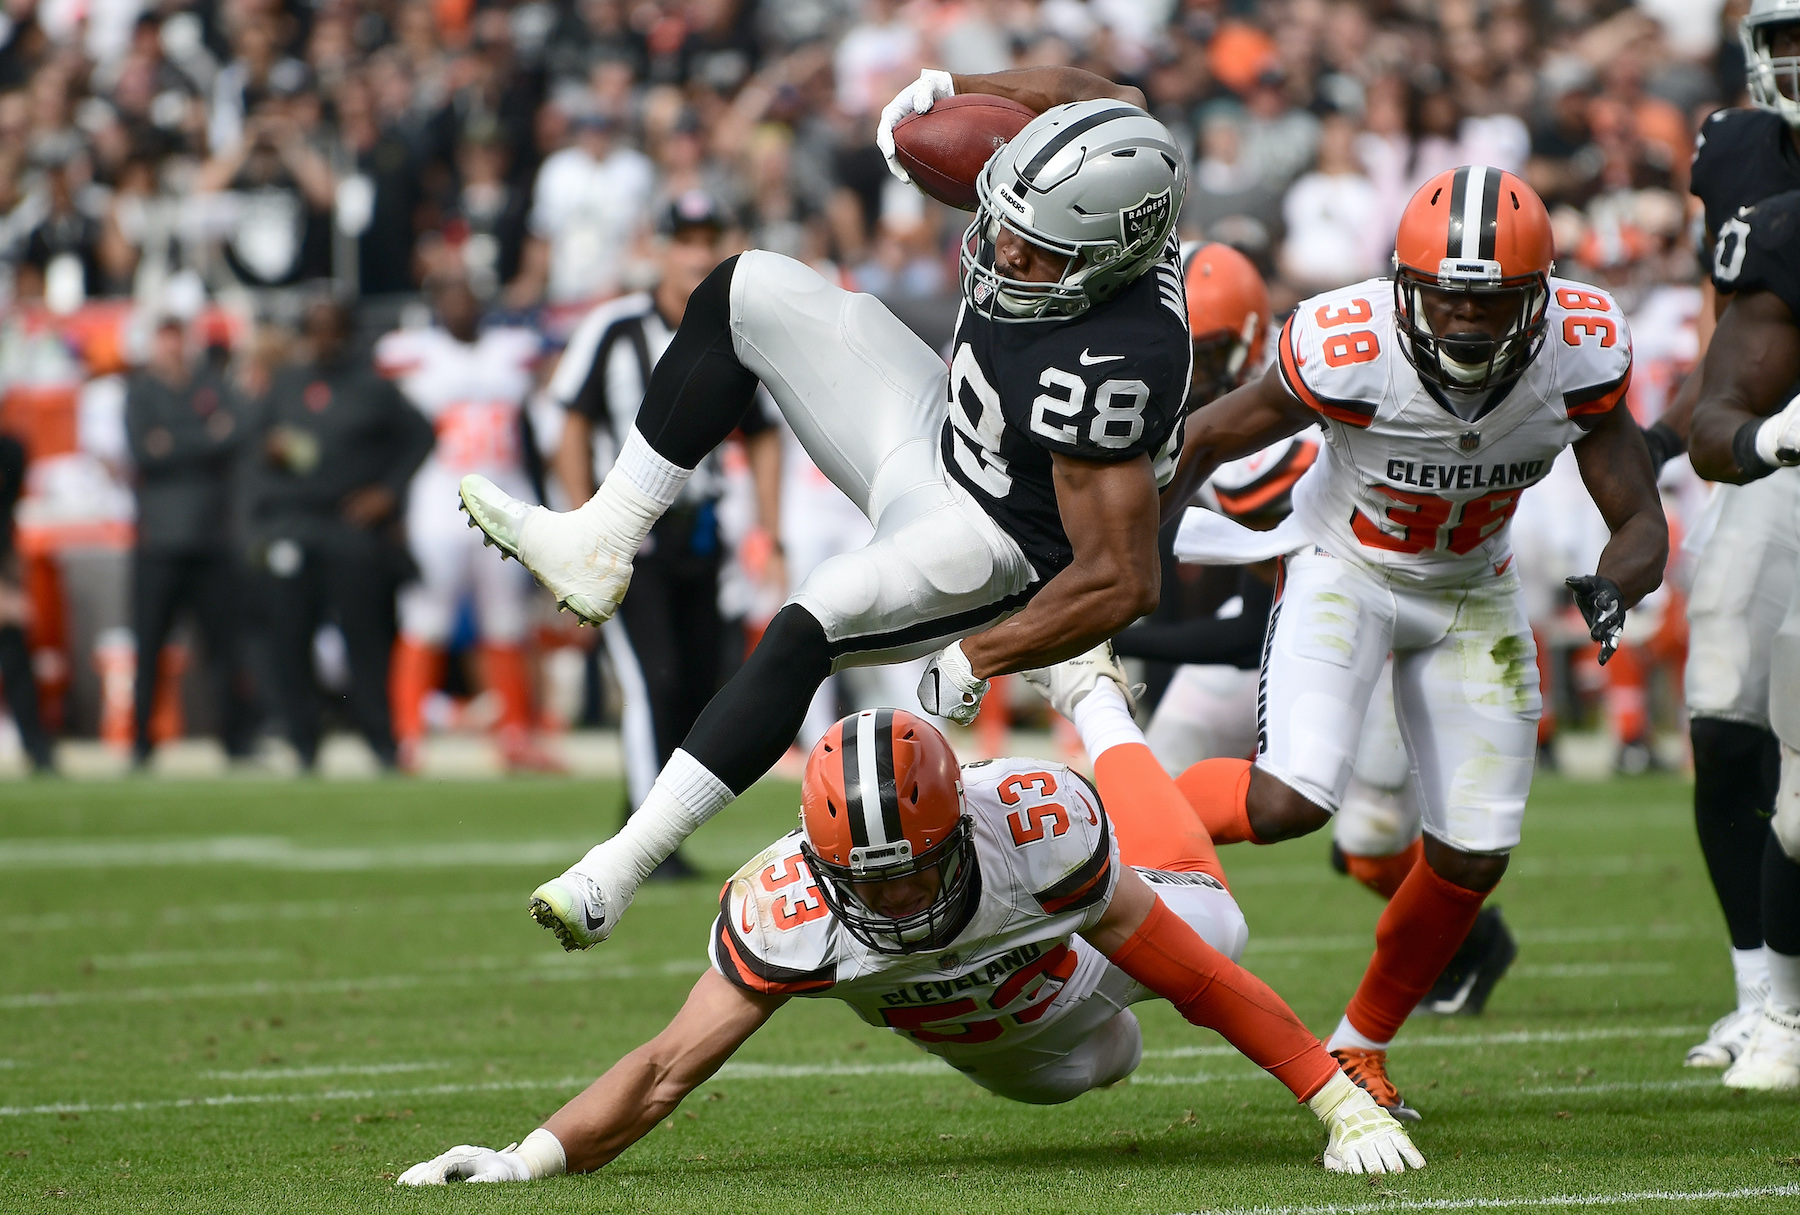 Doug Martin of the Oakland Raiders gets tackled by Joe Schobert of the Cleveland Browns in 2018